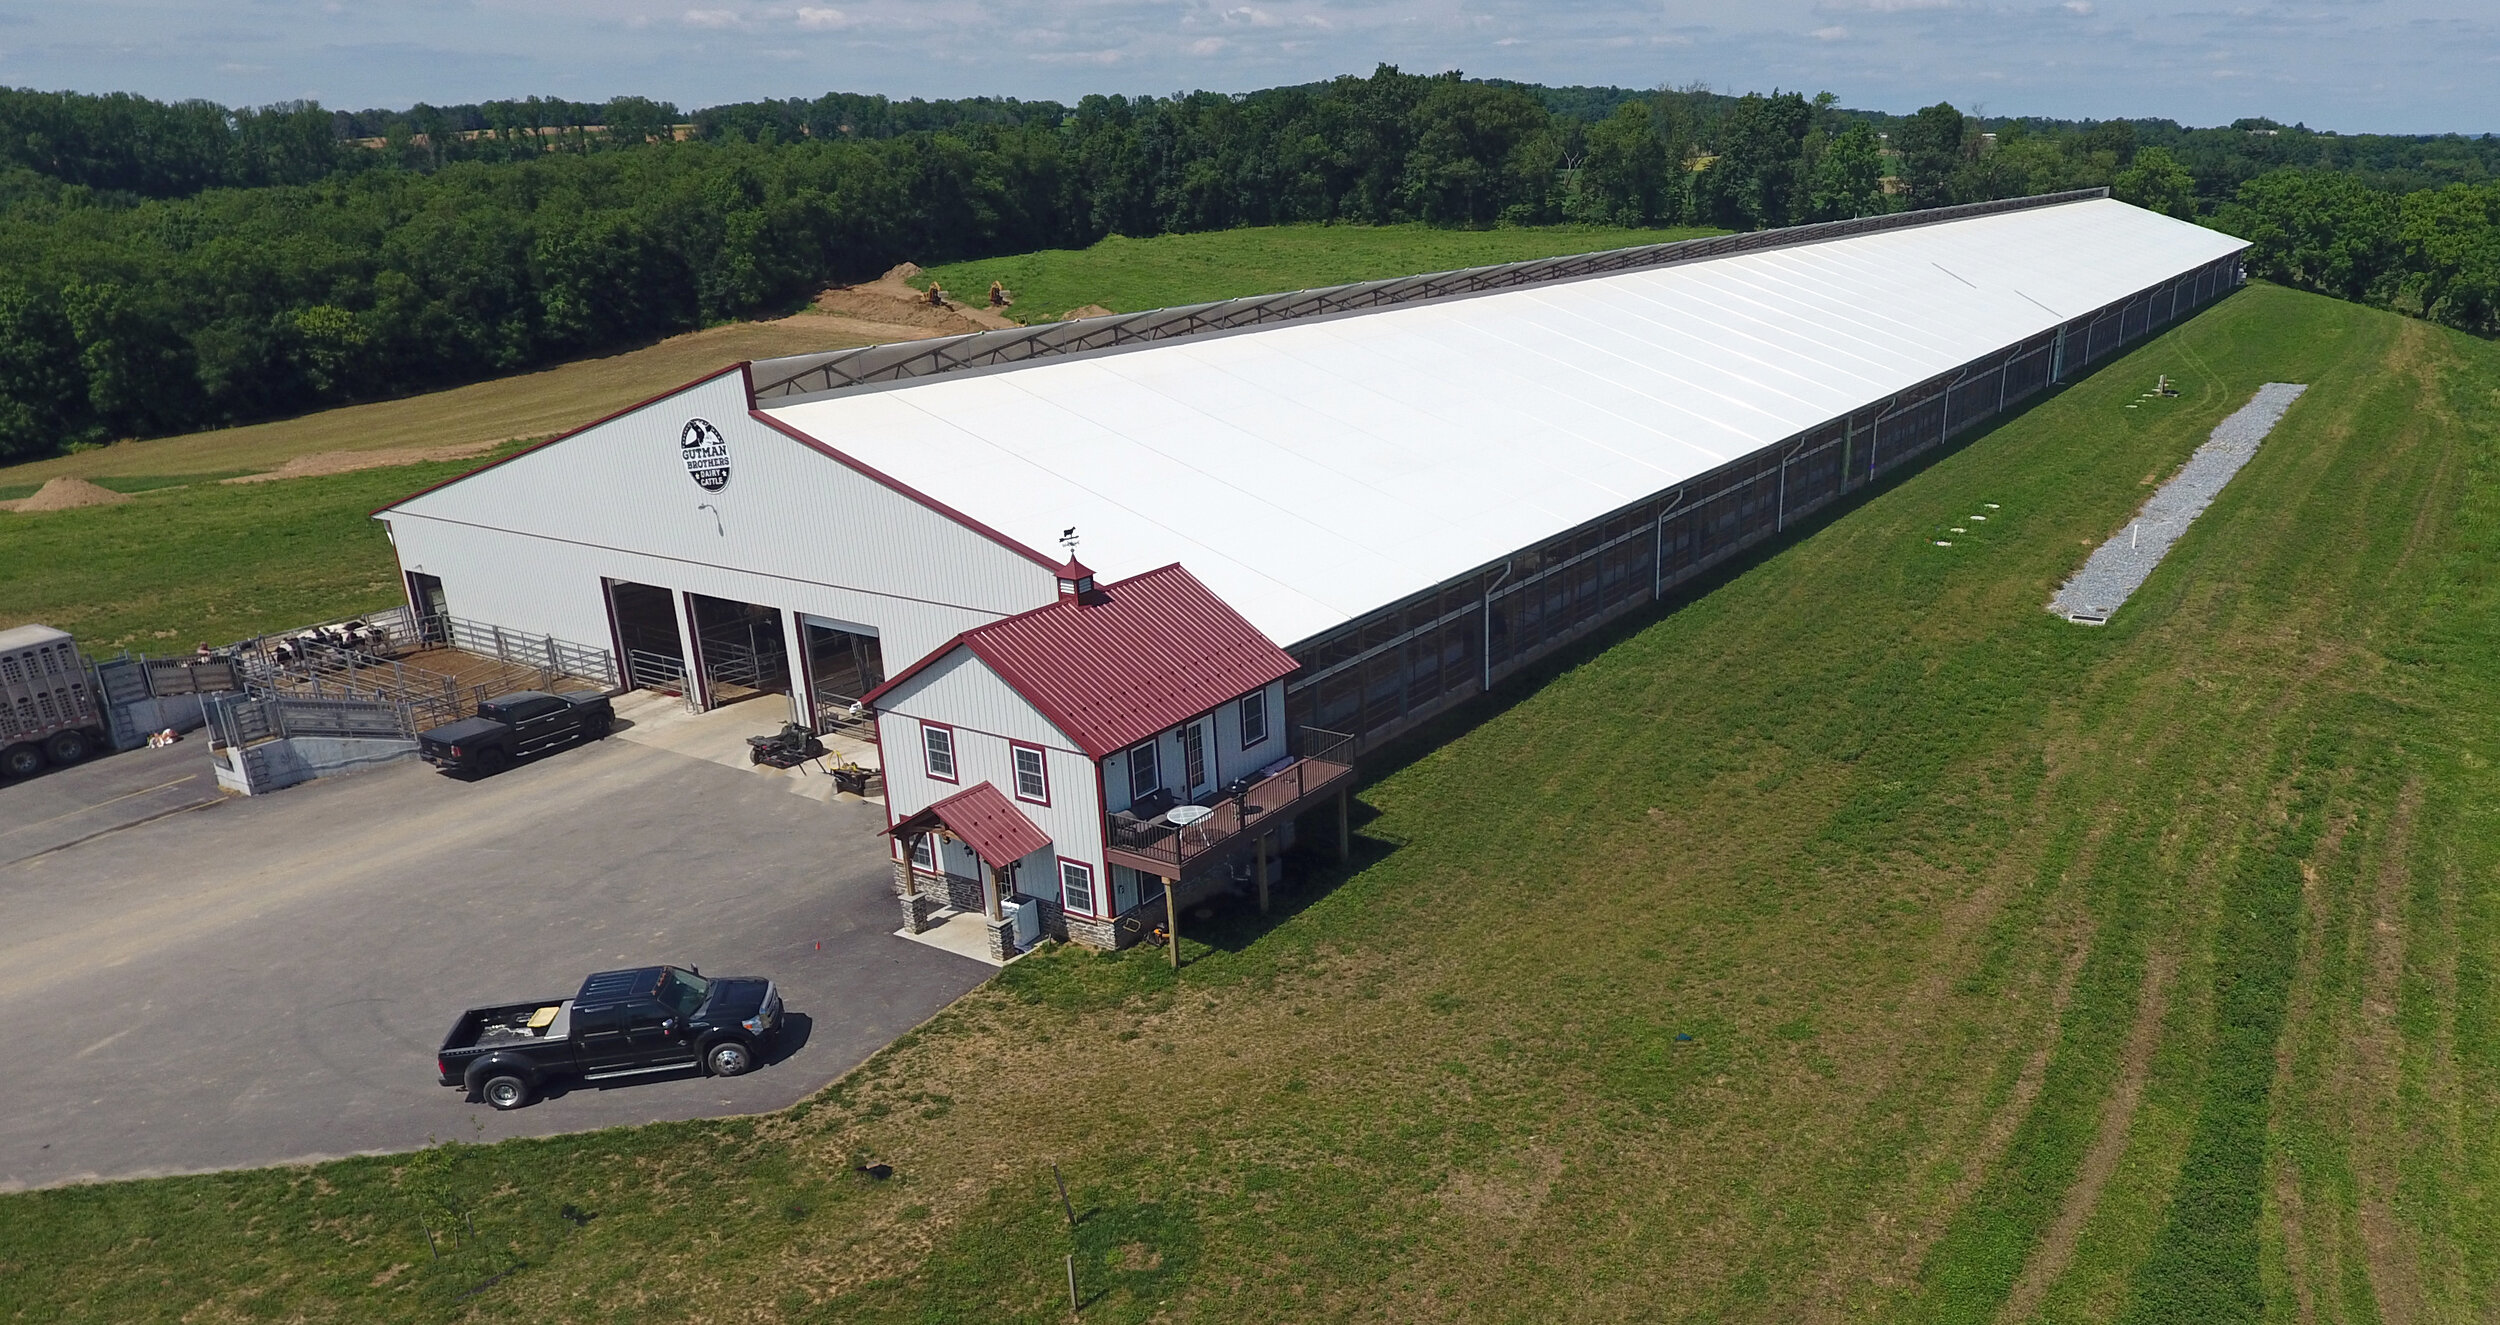 The front of Gutman Farm's fabric roof dairy barn. 